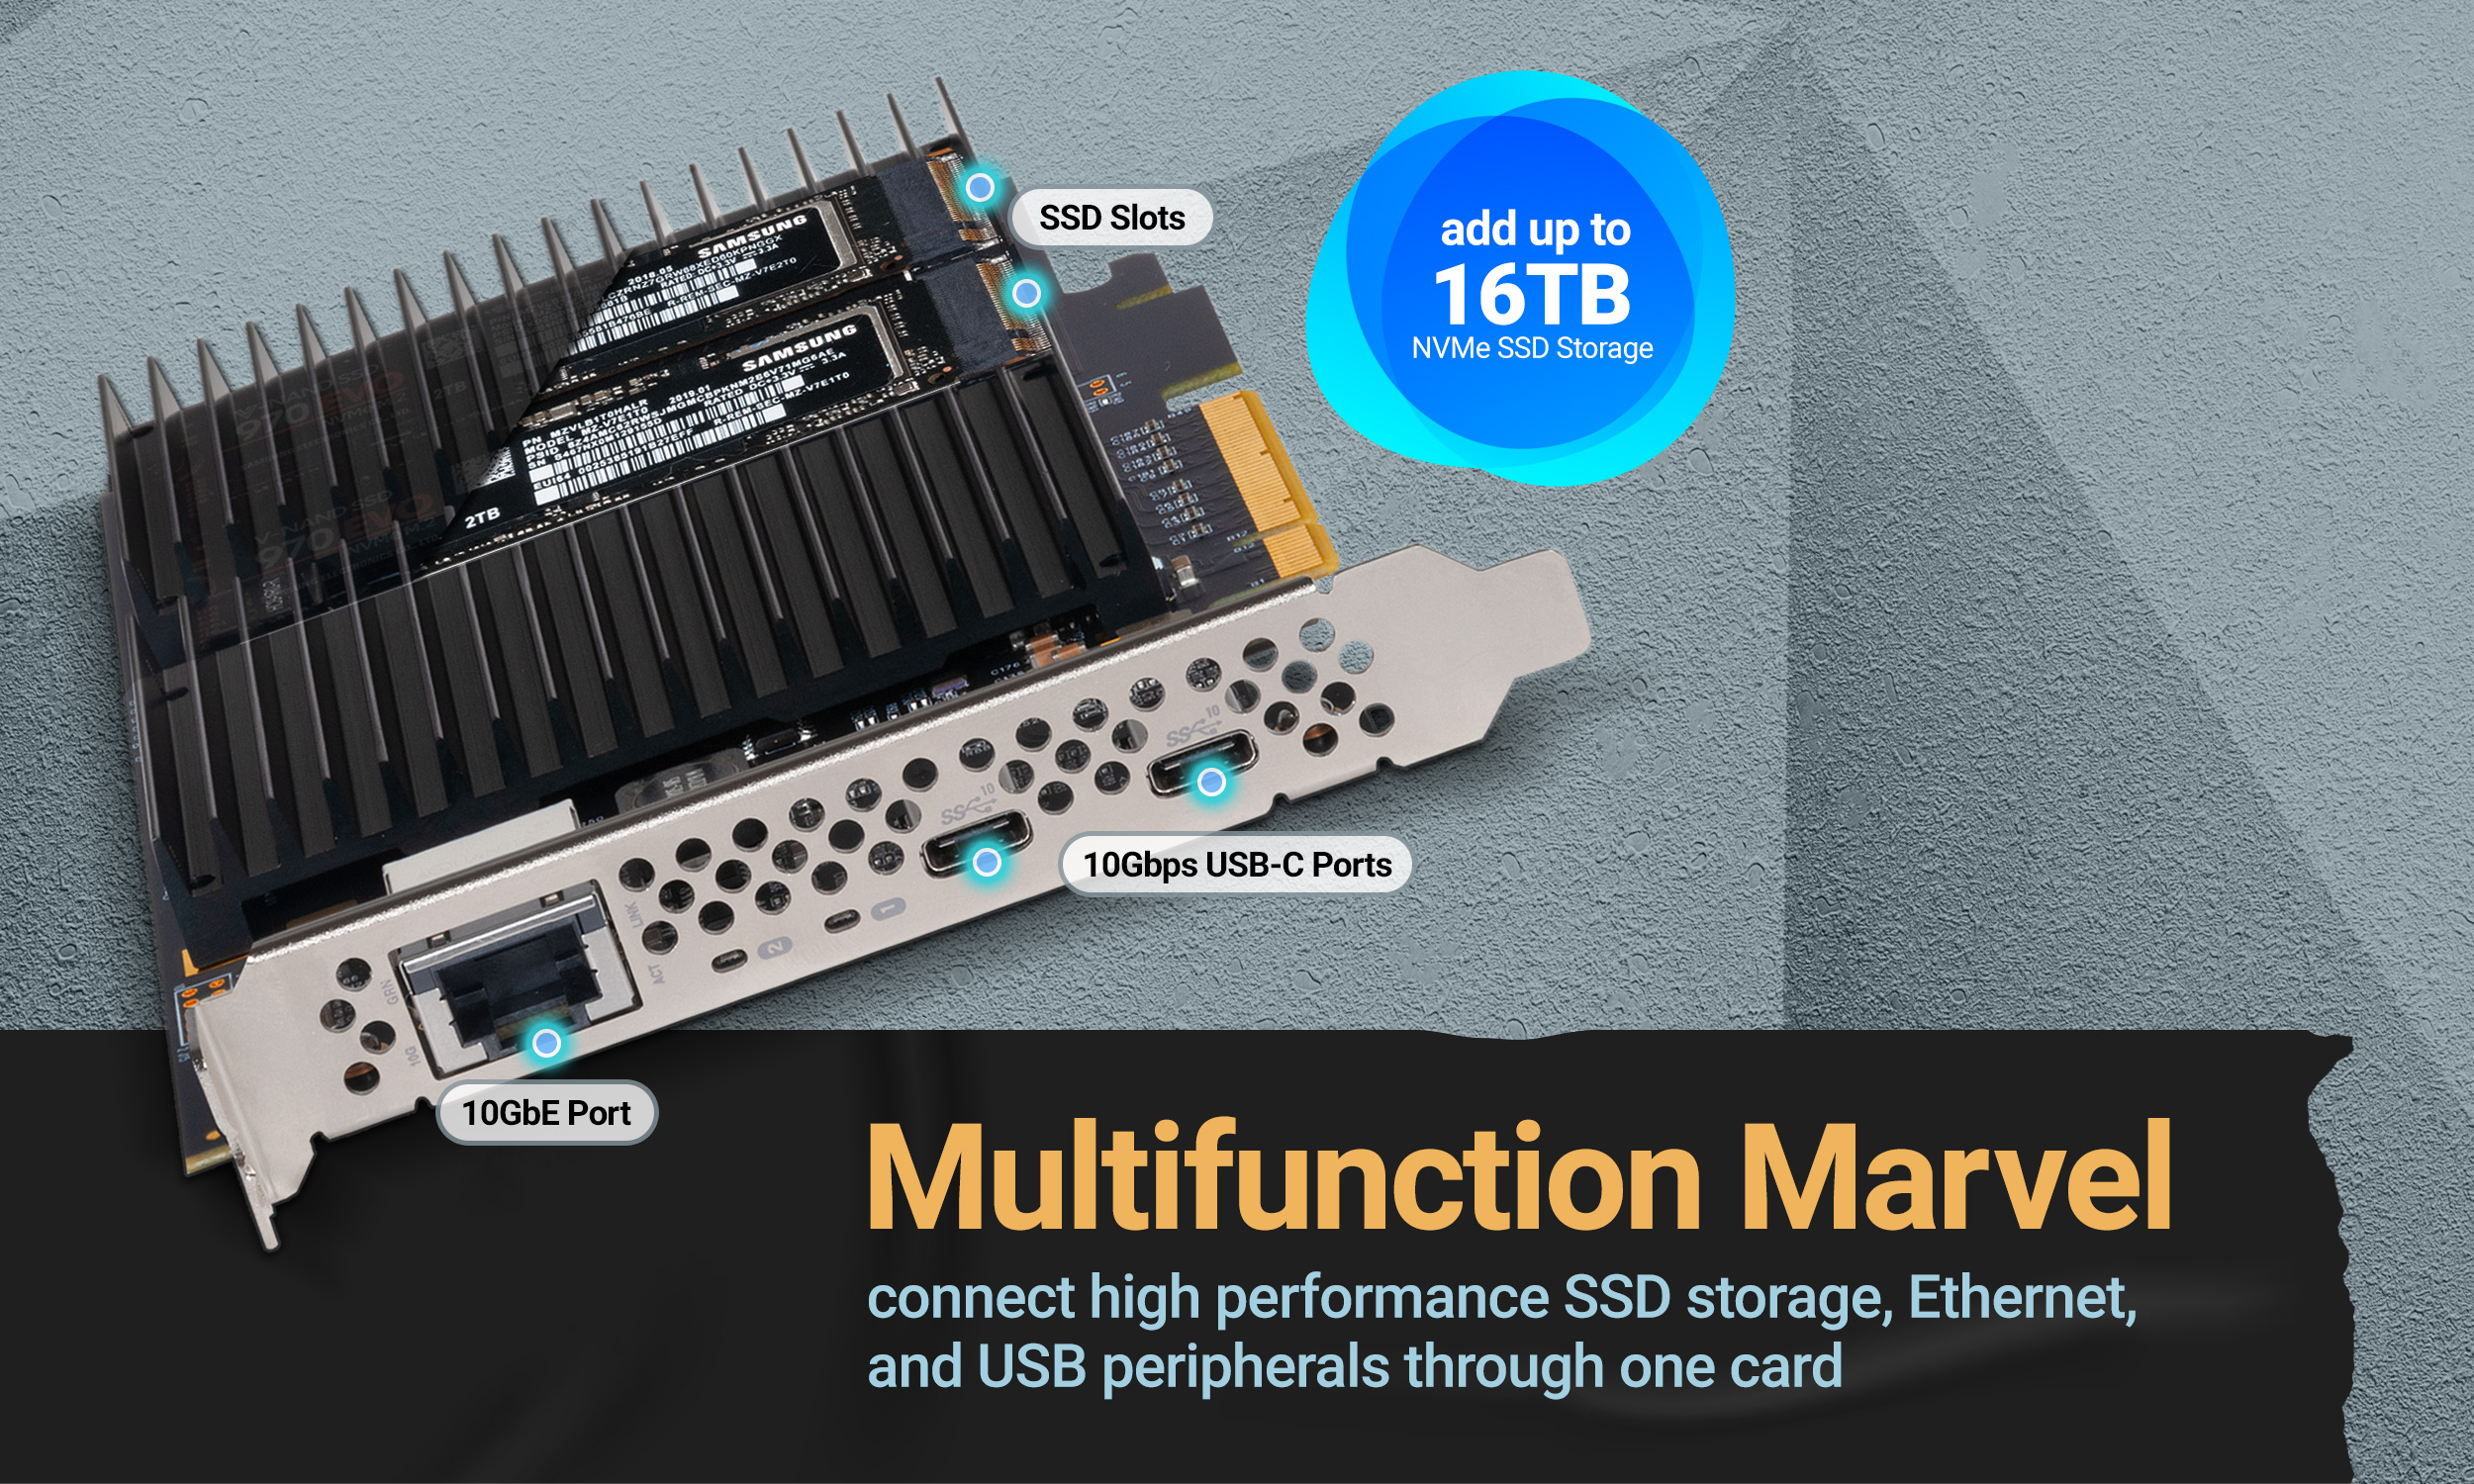 Multifunction Marvel - Connect High Performance SSD Storage, Ethernet, and USB Peripherals Through One Card